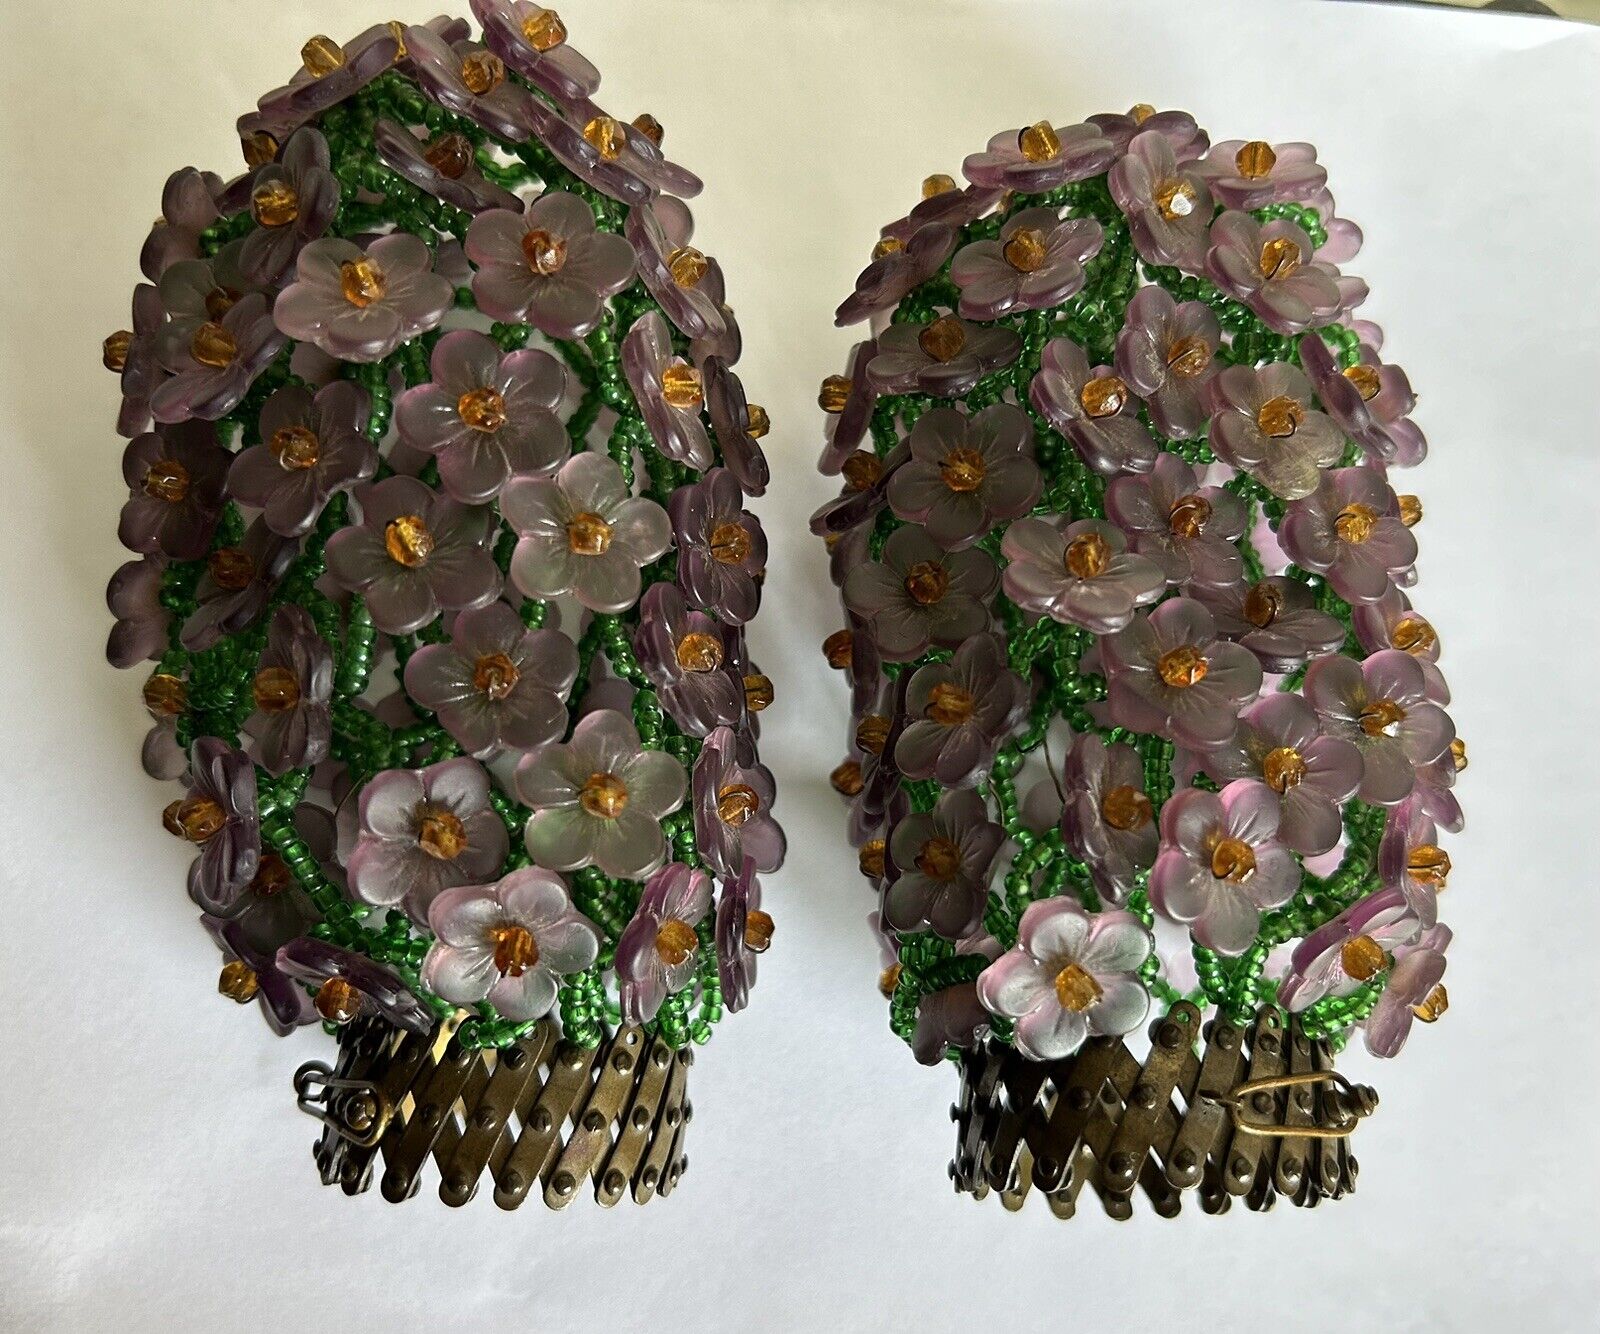 2 Antique Czech Glass Beaded Flower Bulb Covers Shades, Lamps Sold Separately